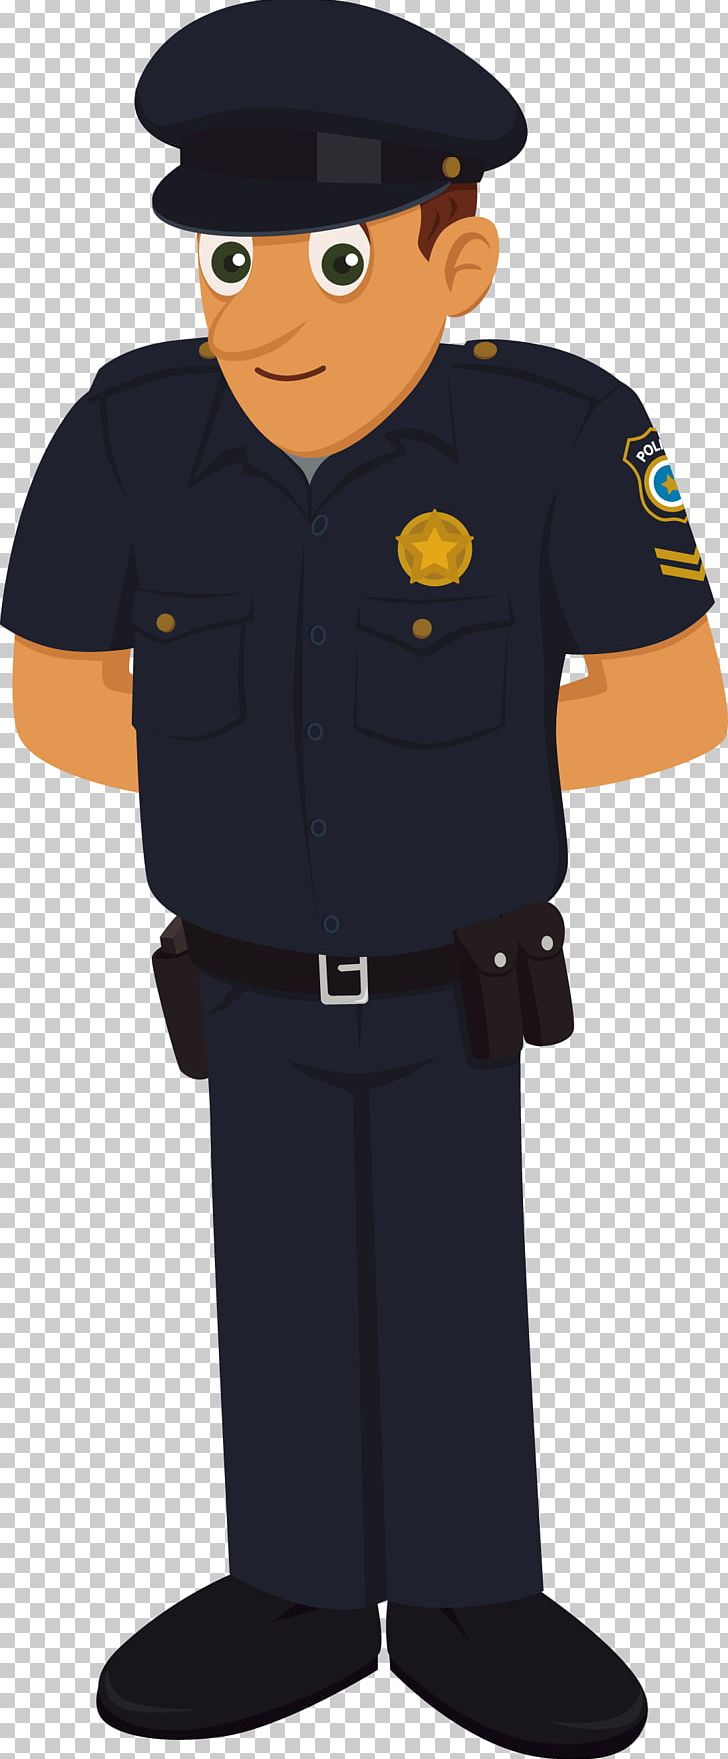 Police Officer Police Uniforms Of The United States PNG, Clipart, Cartoon, Cartoon  Police, Encapsulated Postscript, Euclidean